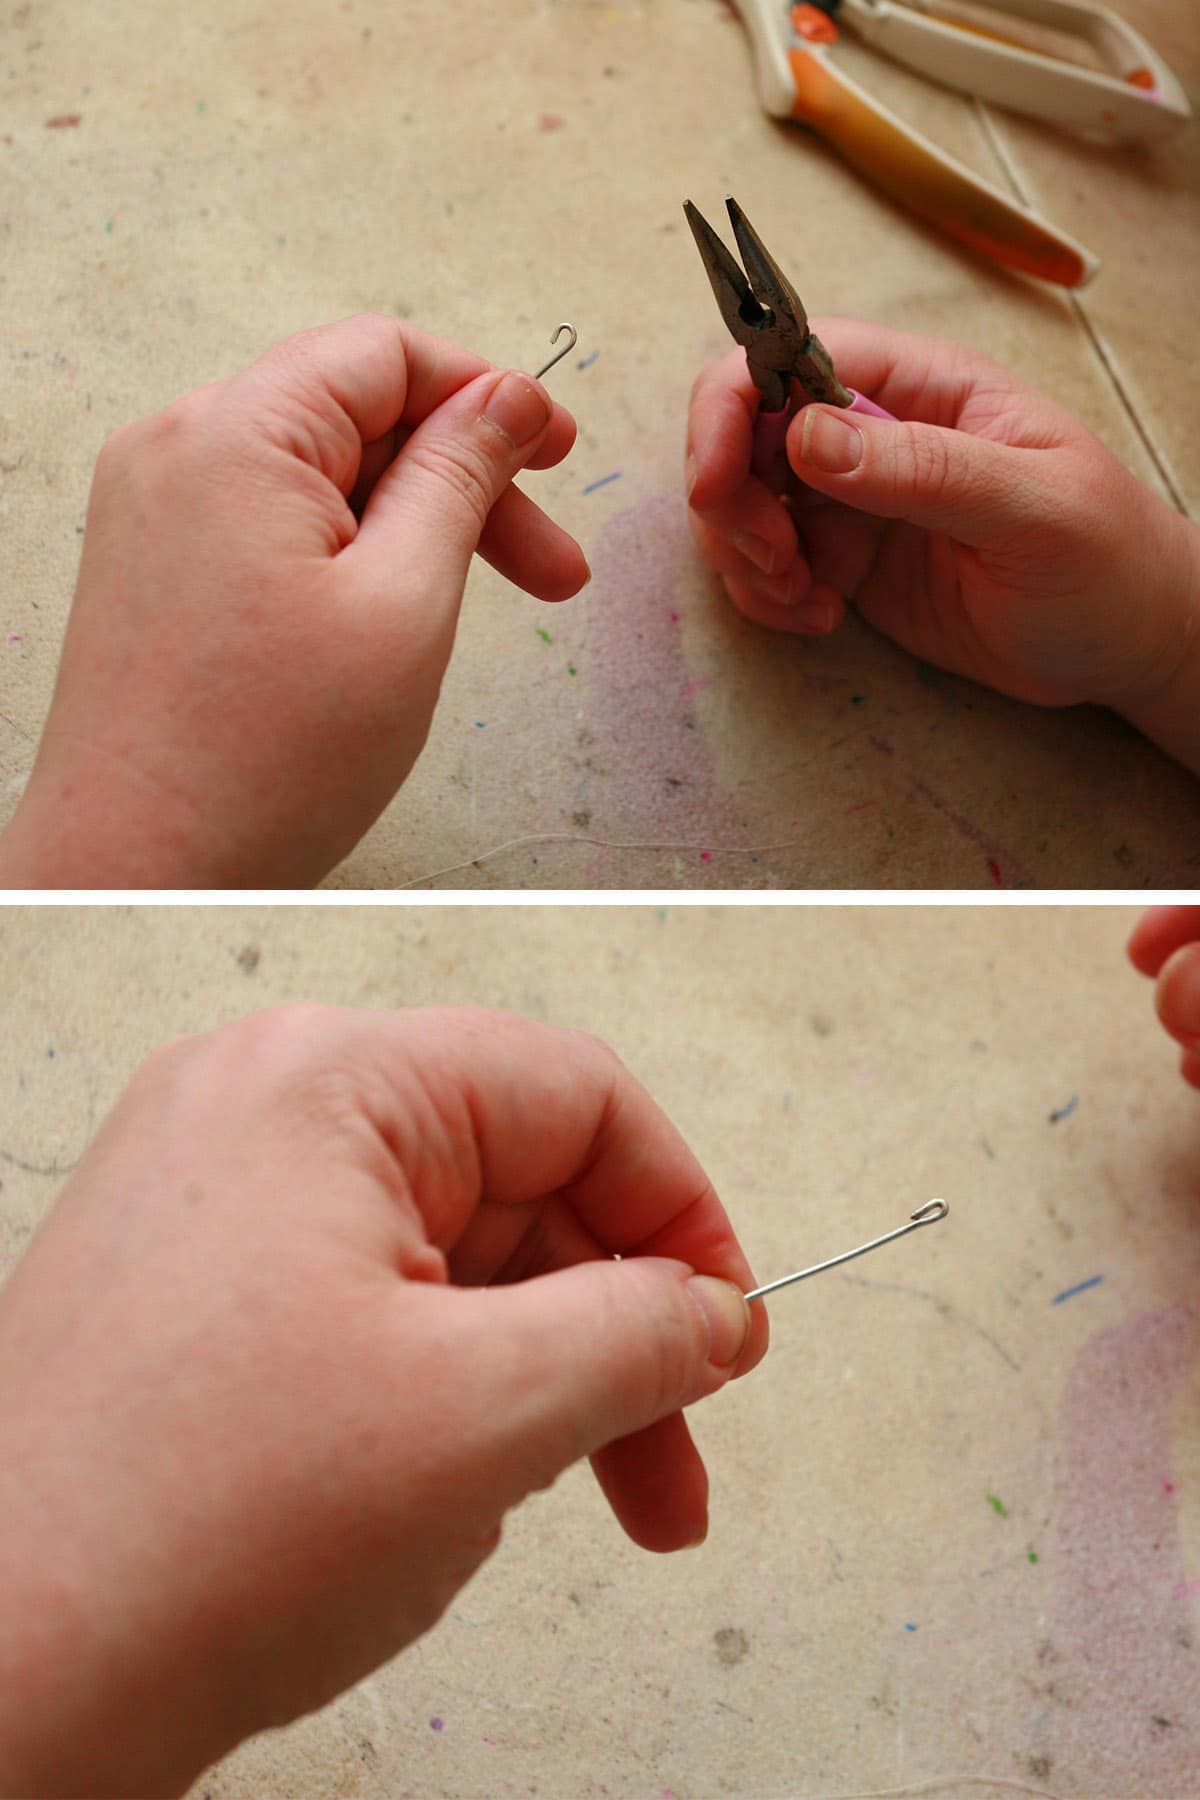 Pliers are being used to bend the tips of the wire.